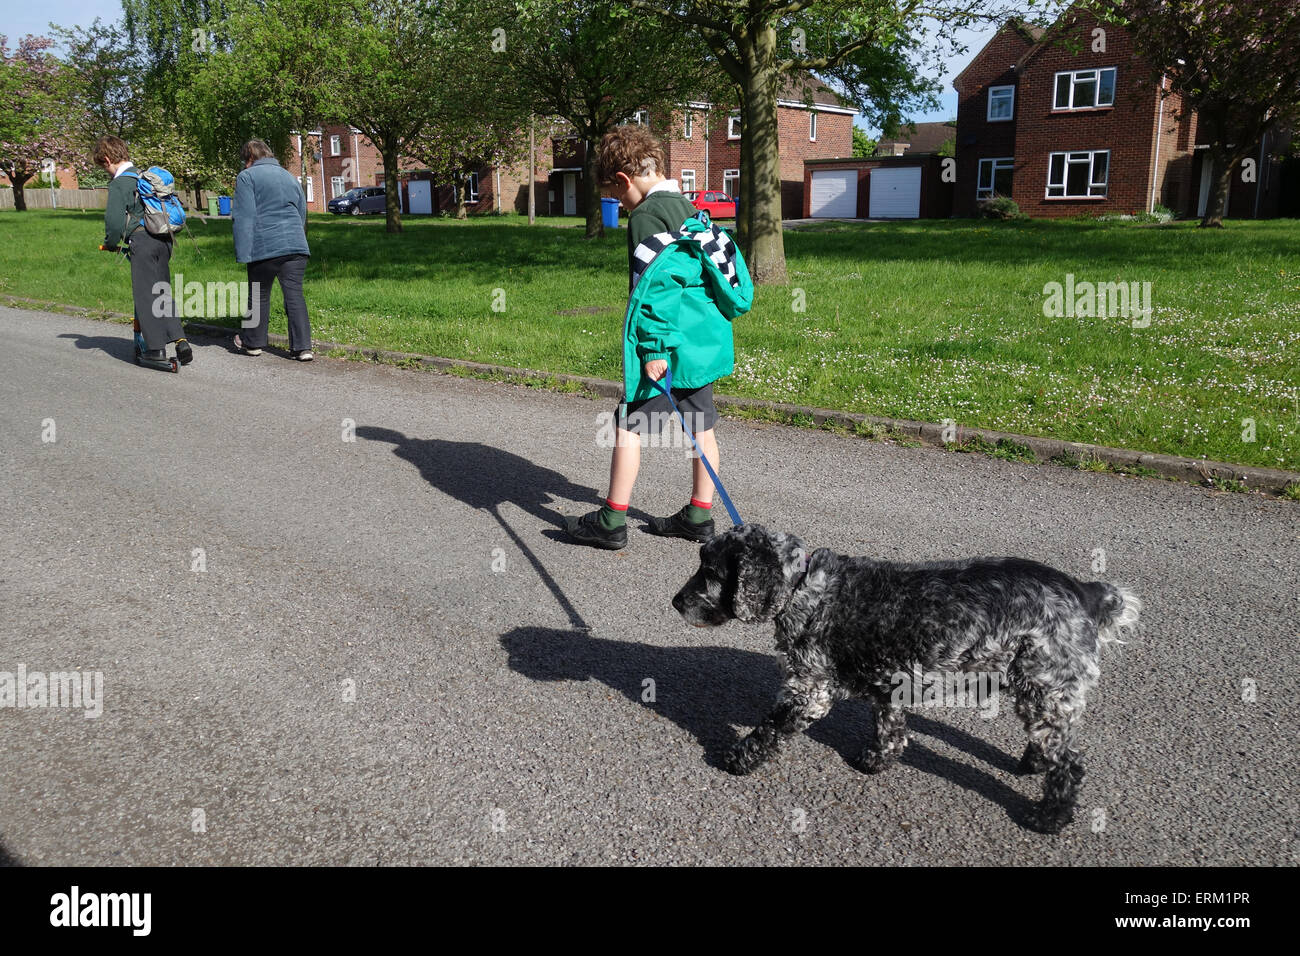 Young boys going to school, and dog on lead Stock Photo